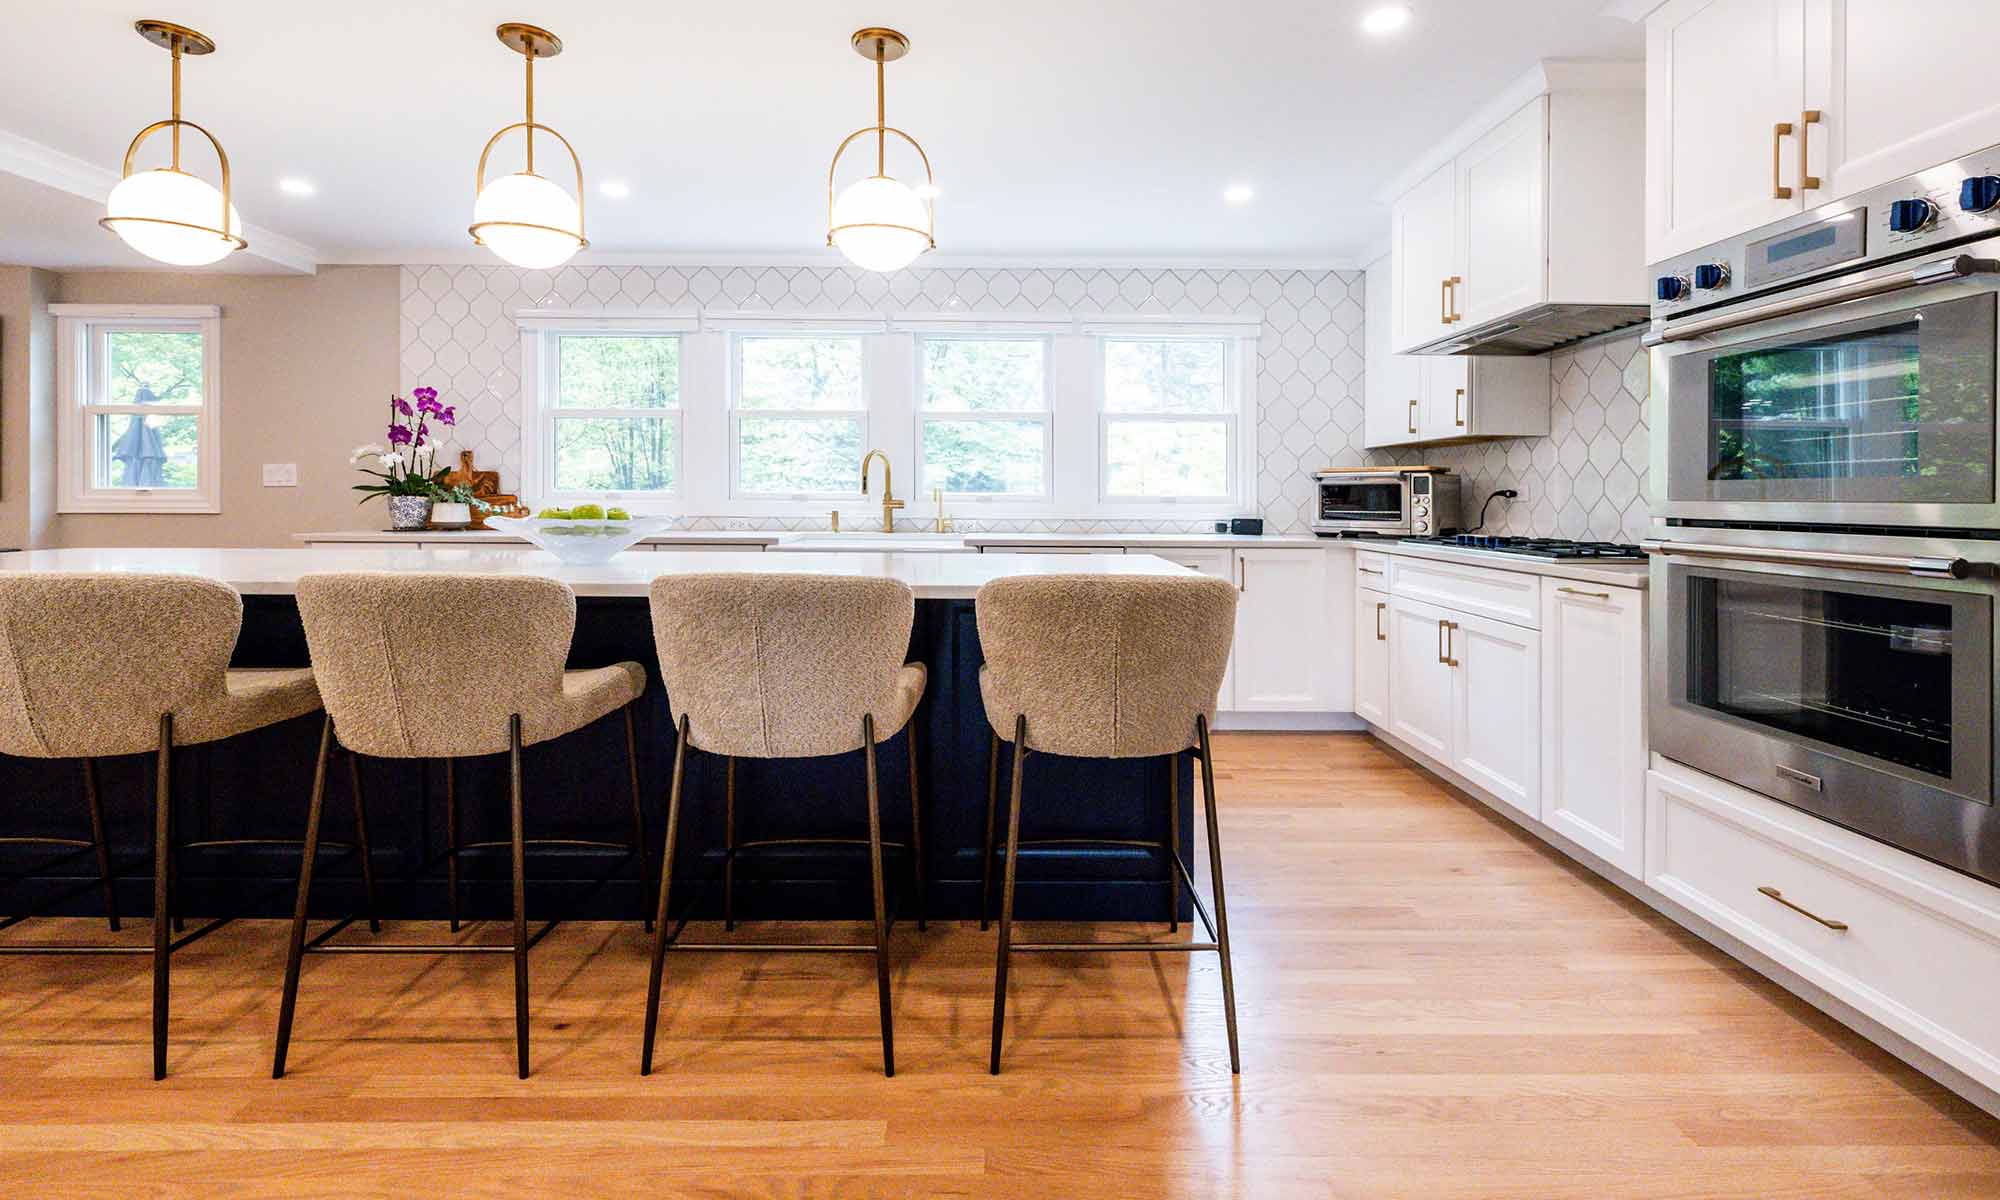 A kitchen with white cabinets and chairs